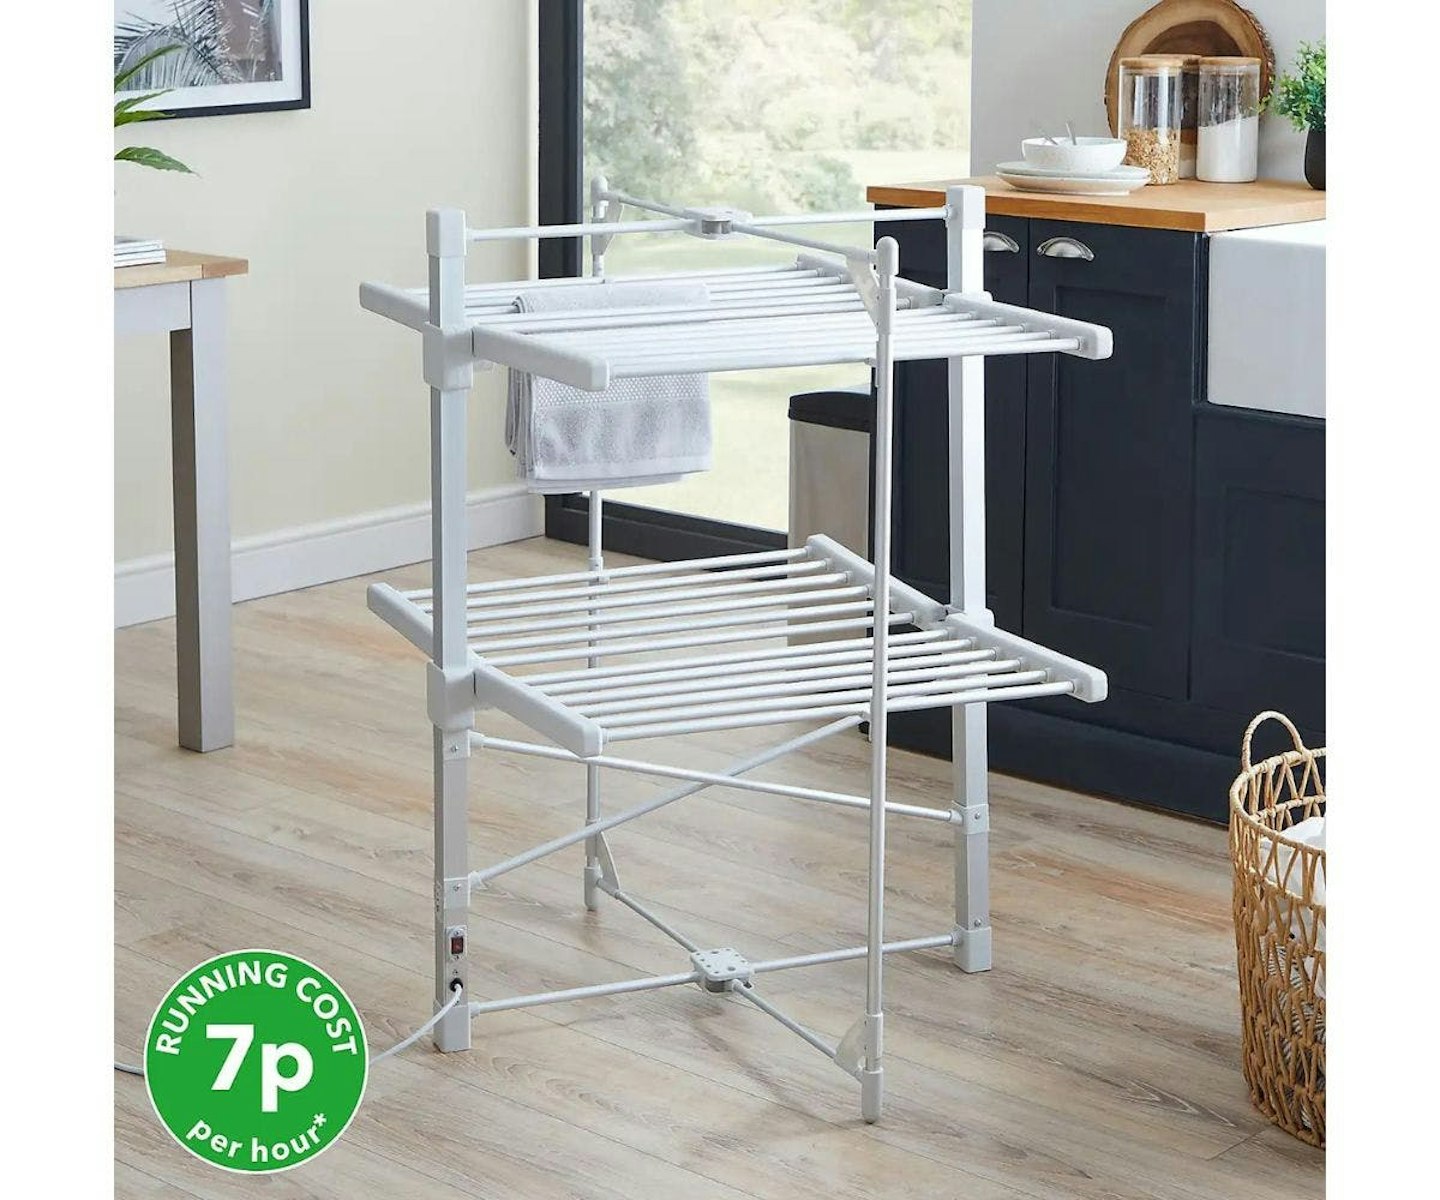 The best heated clothes airers: Dunelm 2 Tier Heated Airer